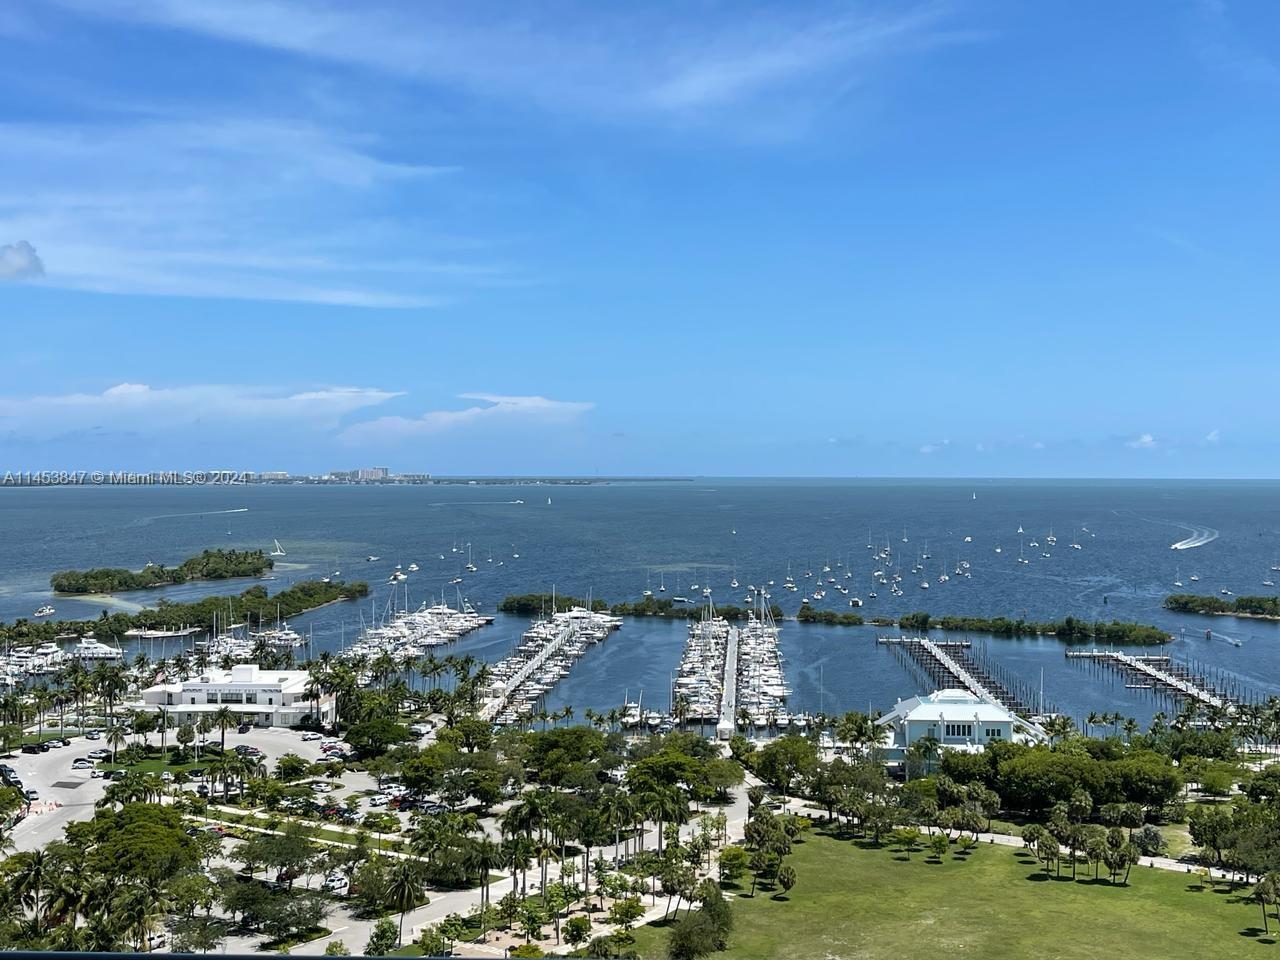 Astonishing Unobstructed Direct East and South Bayview. One of the kinds PH Ritz Residence Coconut Grove with oversized separate terraces with amazing views of the ocean and breathtaking sunrise and sunset postal views. This upgraded PH has 4935 sq ft with extra large rooms for entertaining while enjoying the magnificent views of the Biscayne Bay. Fully furnished with Superior Marble throughout, Upgraded Stainless Viking Kitchen including Granite Countertops. Master Bath with Jacuzzi, Shower, and Double sinks. Three terraces, Exclusive Ritz lifestyle shares amenities with the Hotel including Concierge, Restaurant, Pools, Gym, Spa, and more. Heart of Coconut Grove. Easy access to and within walking distance from Fresh Market, Cocowalk, Marina, Fine Dining, Shopping and so much more.